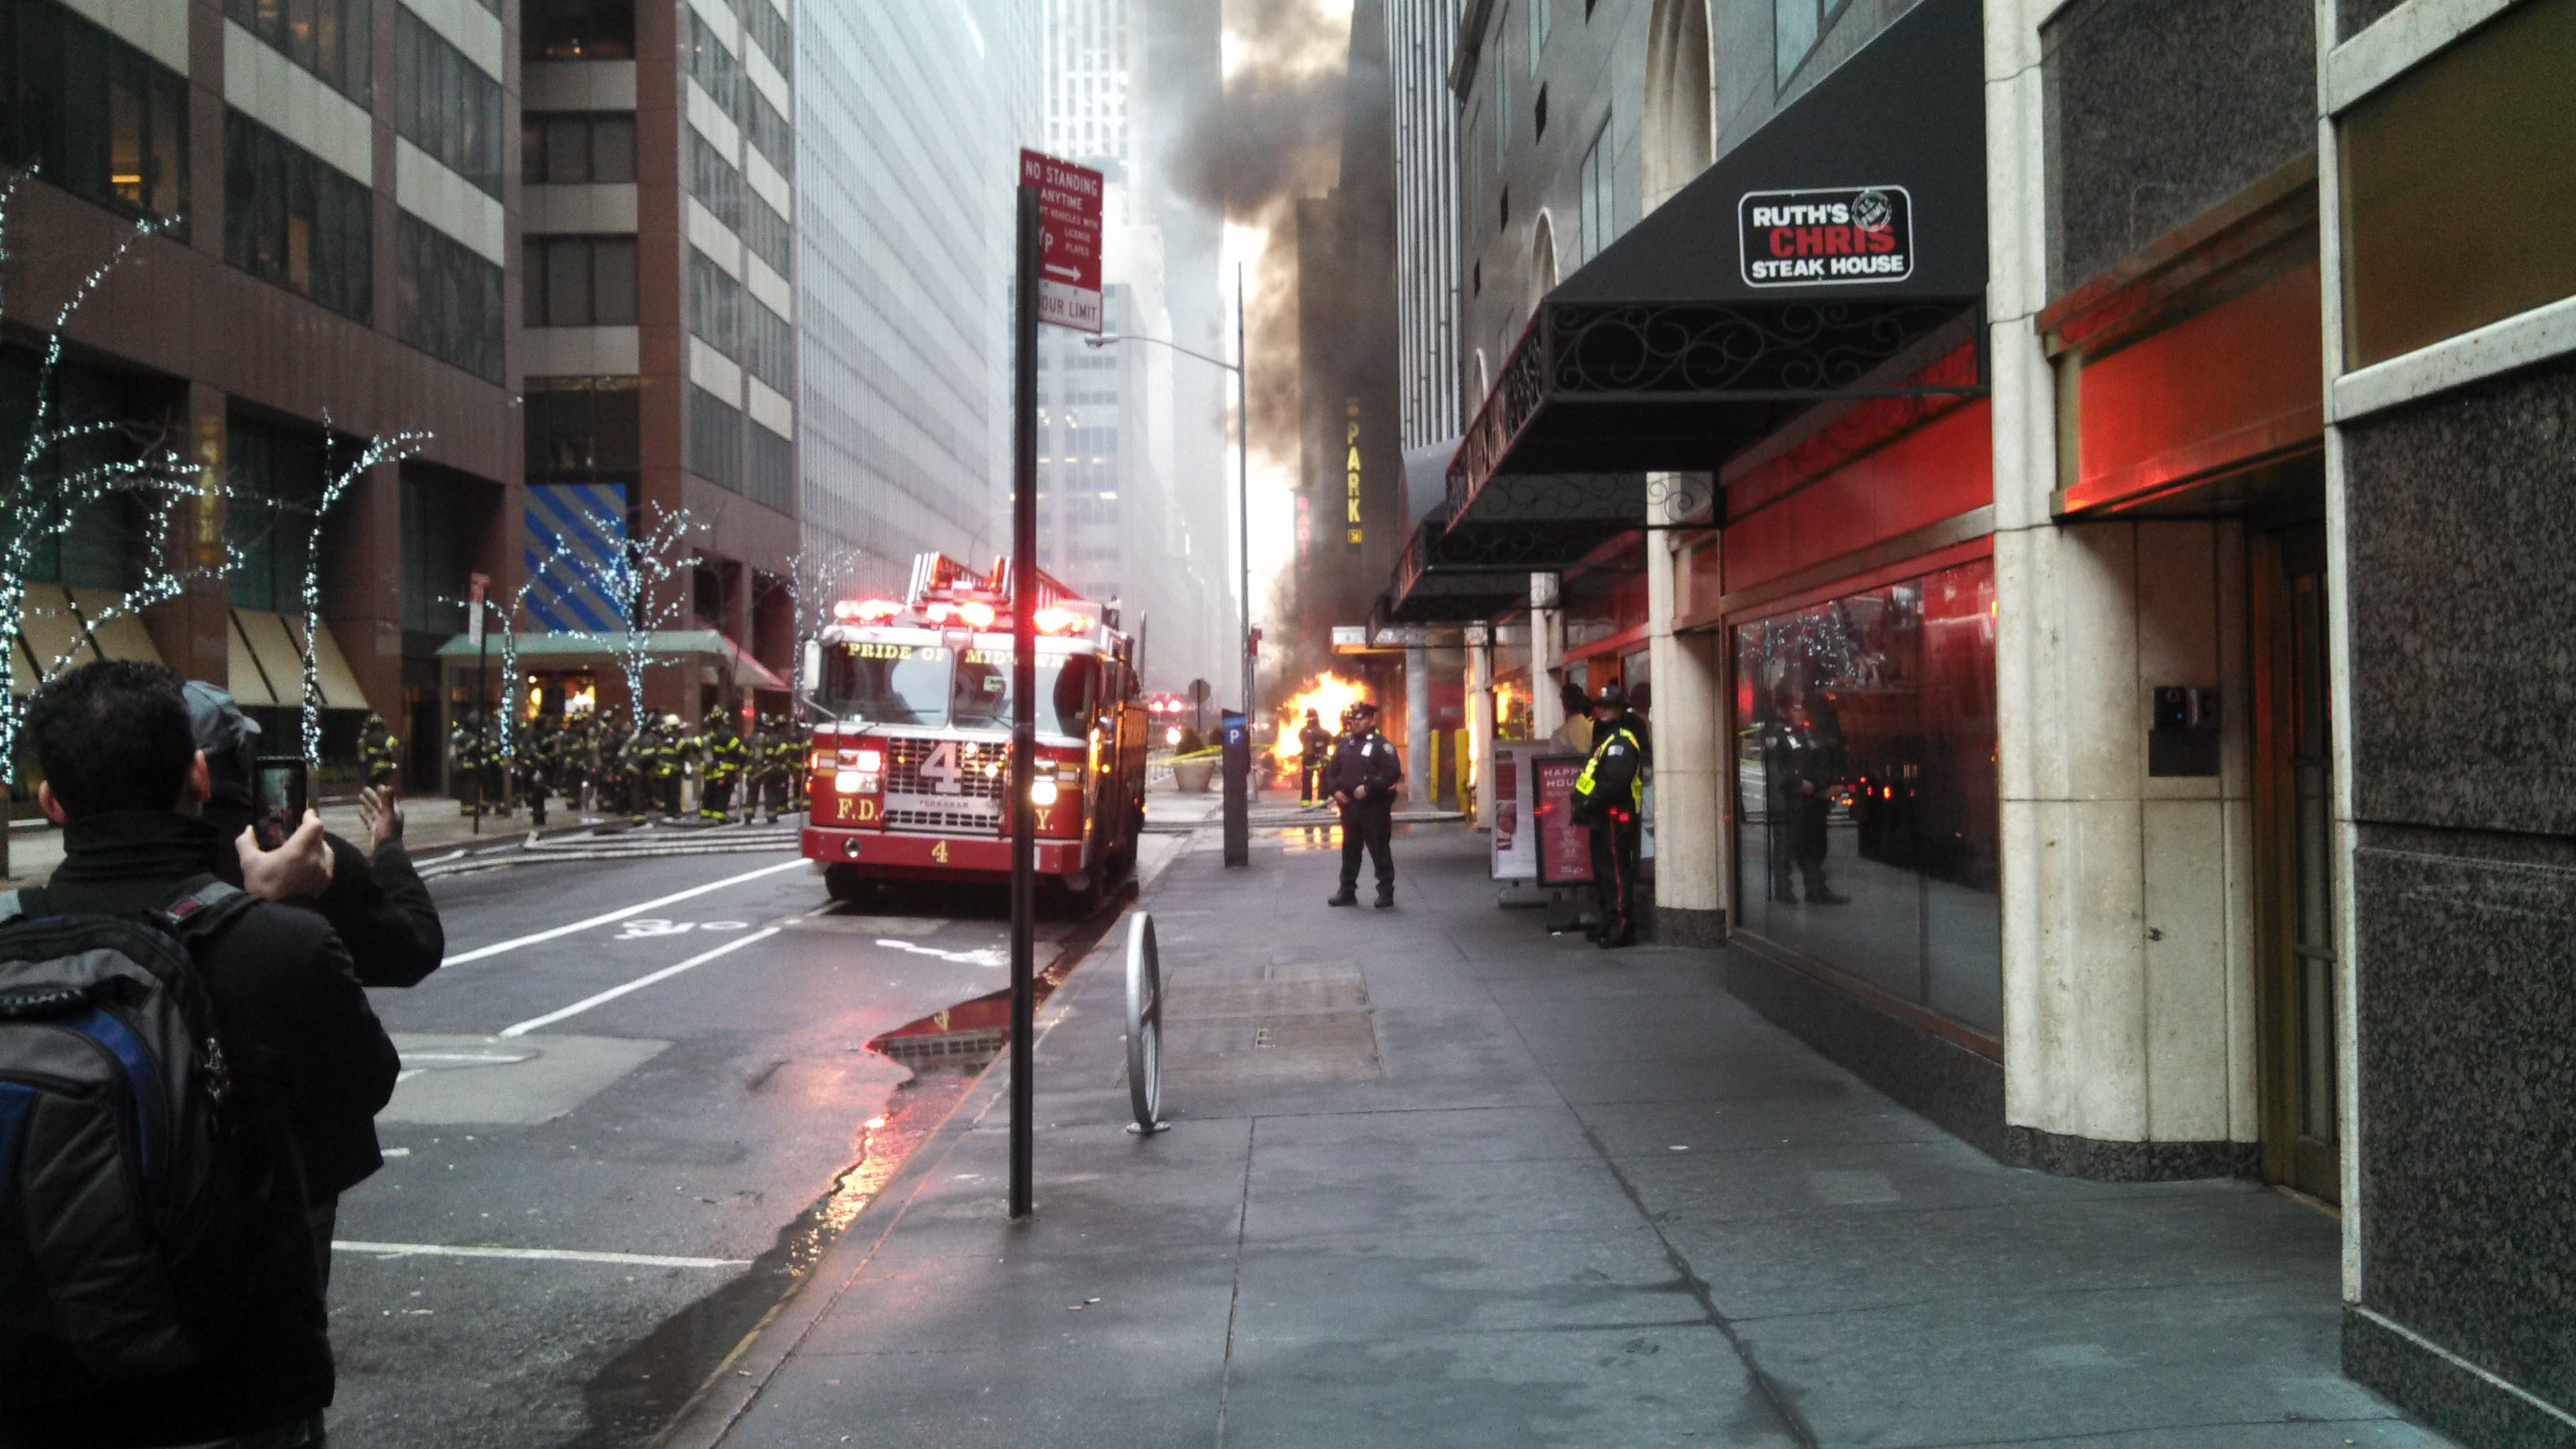 A Midtown building was partially evacuated after a transformer fire Monday, Jan. 5. (Credit: Nikki Erskine)